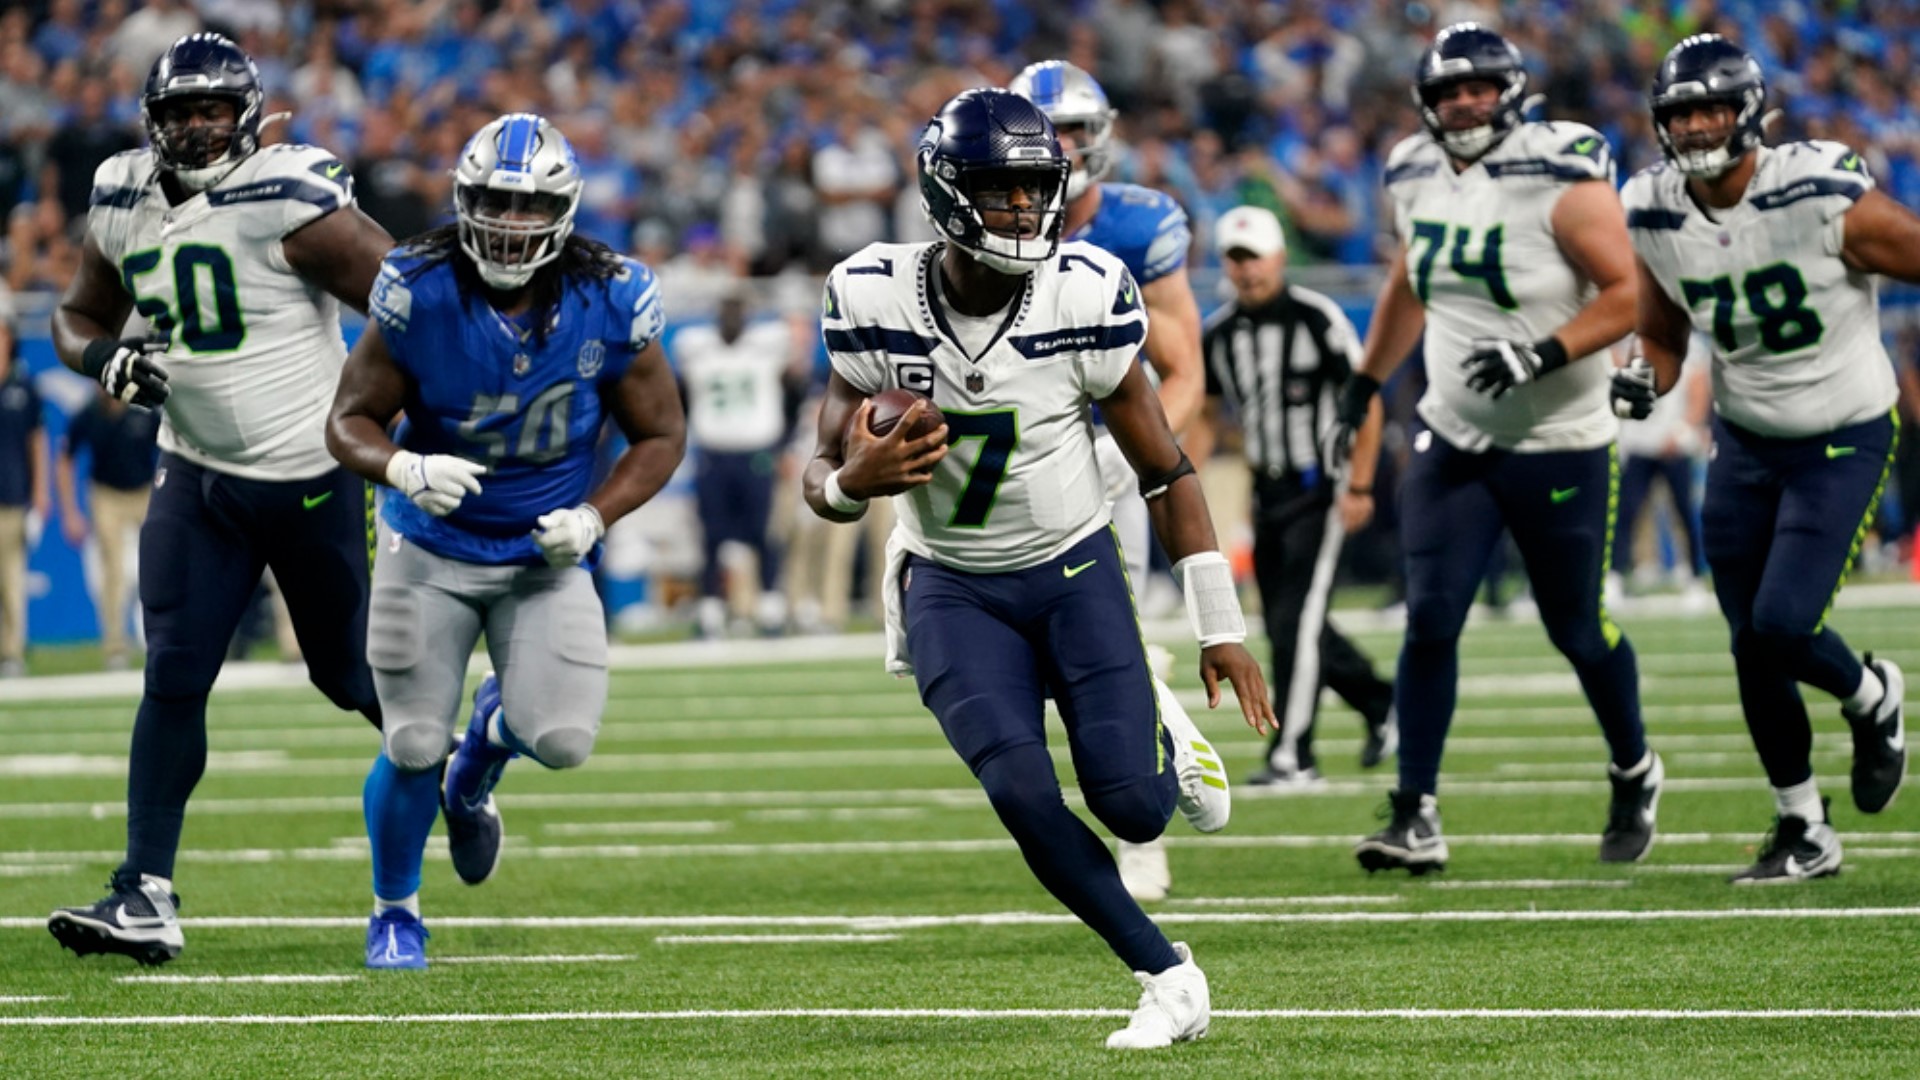 Geno Smith was in command from the opening kickoff, finishing with 328 passing yards and two touchdowns in the Seahawks 37-31 win.